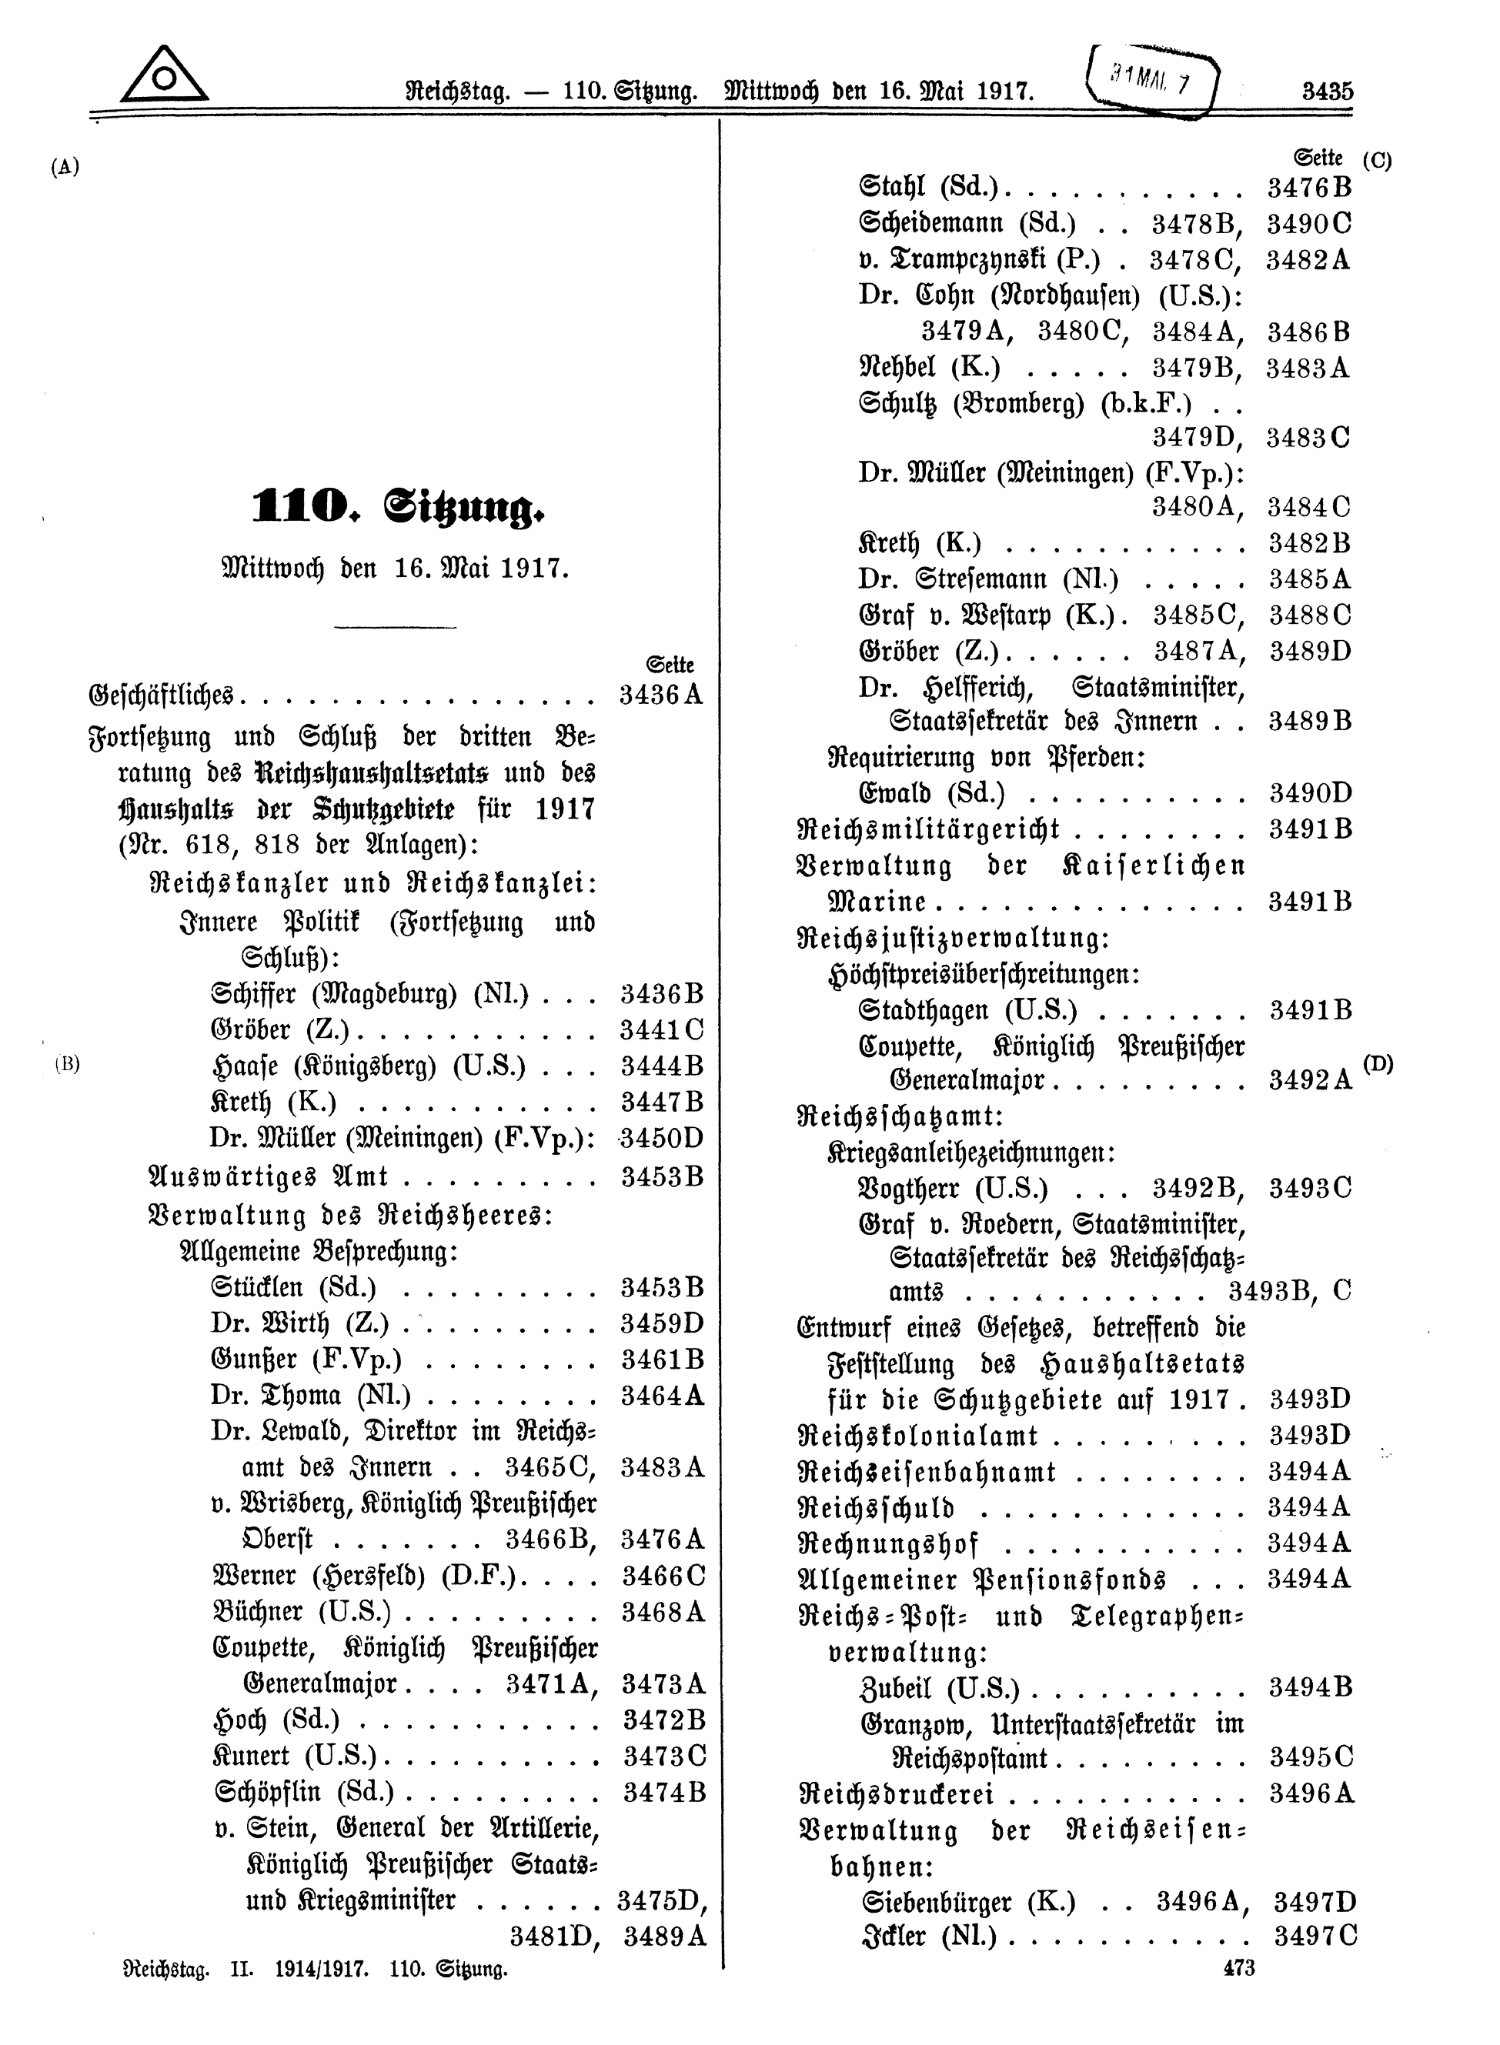 Scan of page 3435